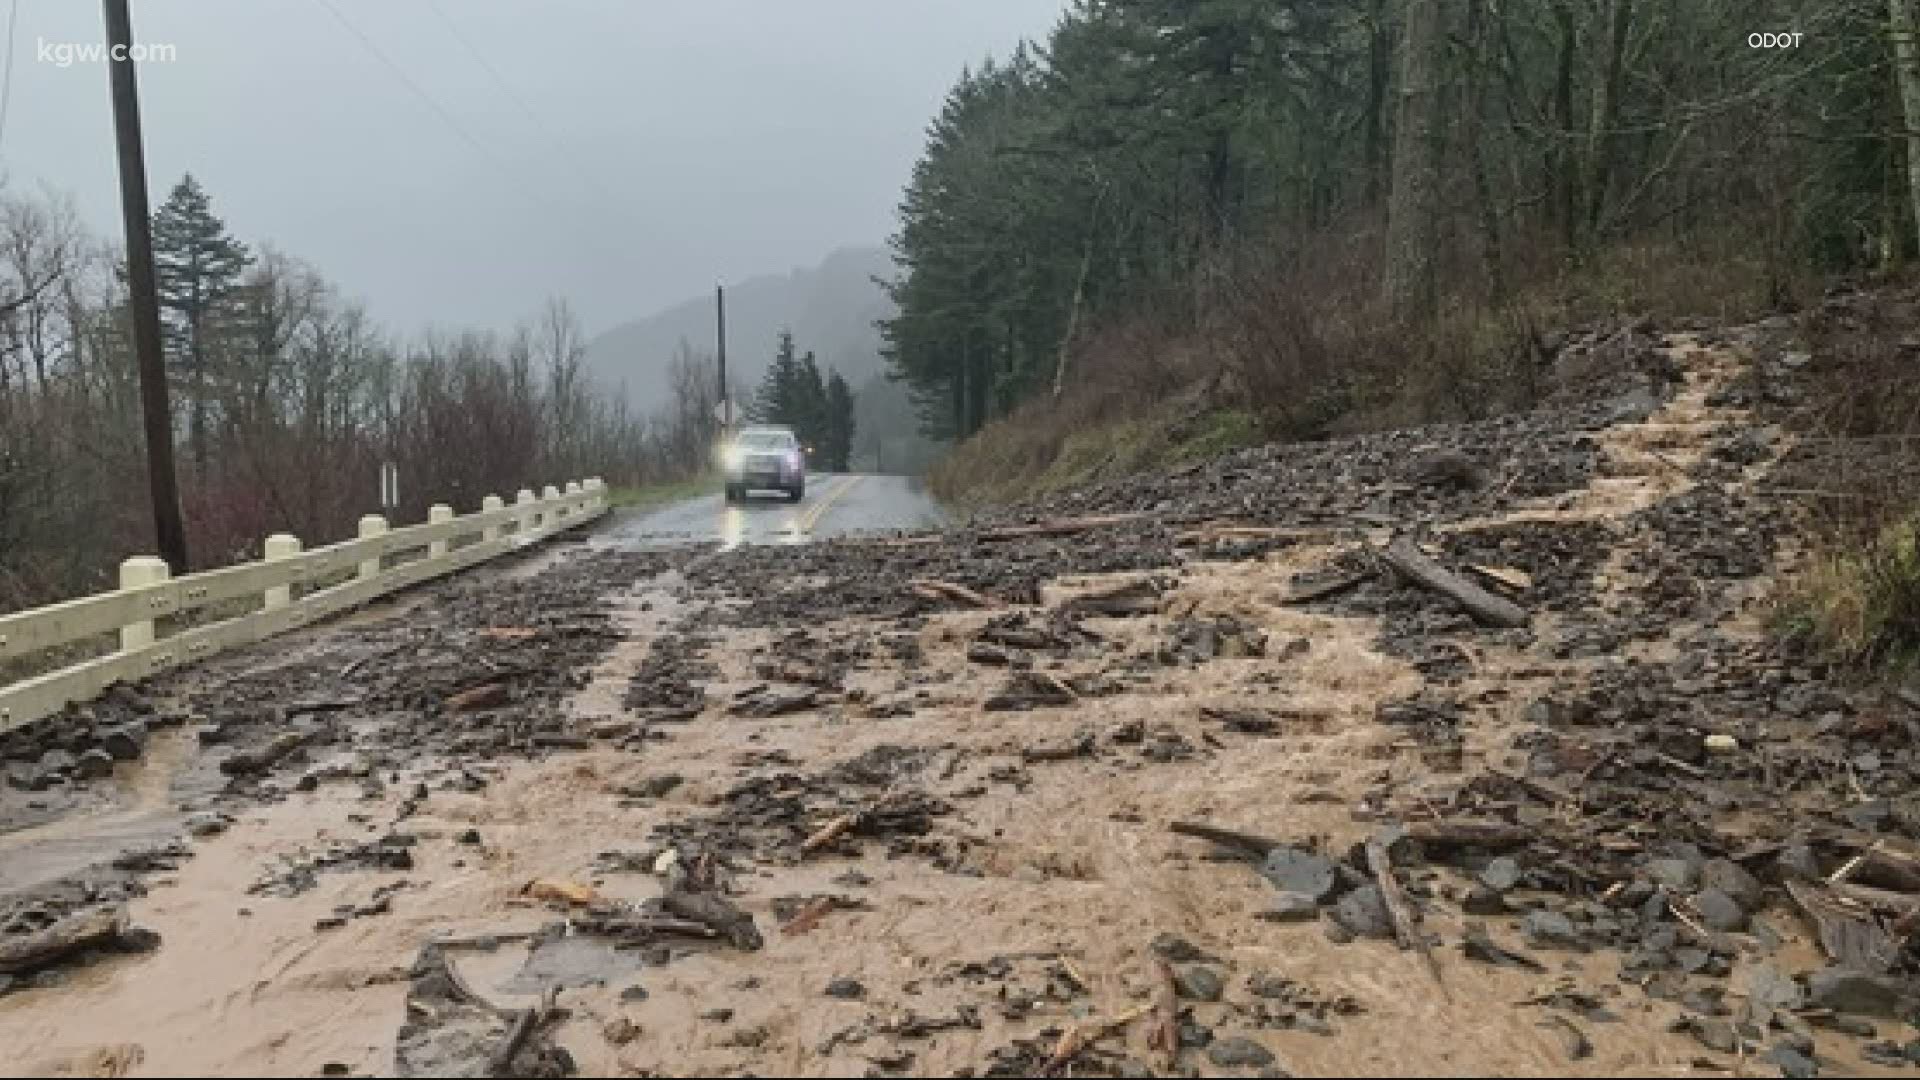 Flooding and landslides after this weekend's heavy rains closed roads in several counties and wiped out a footbridge over Johnson Creek.